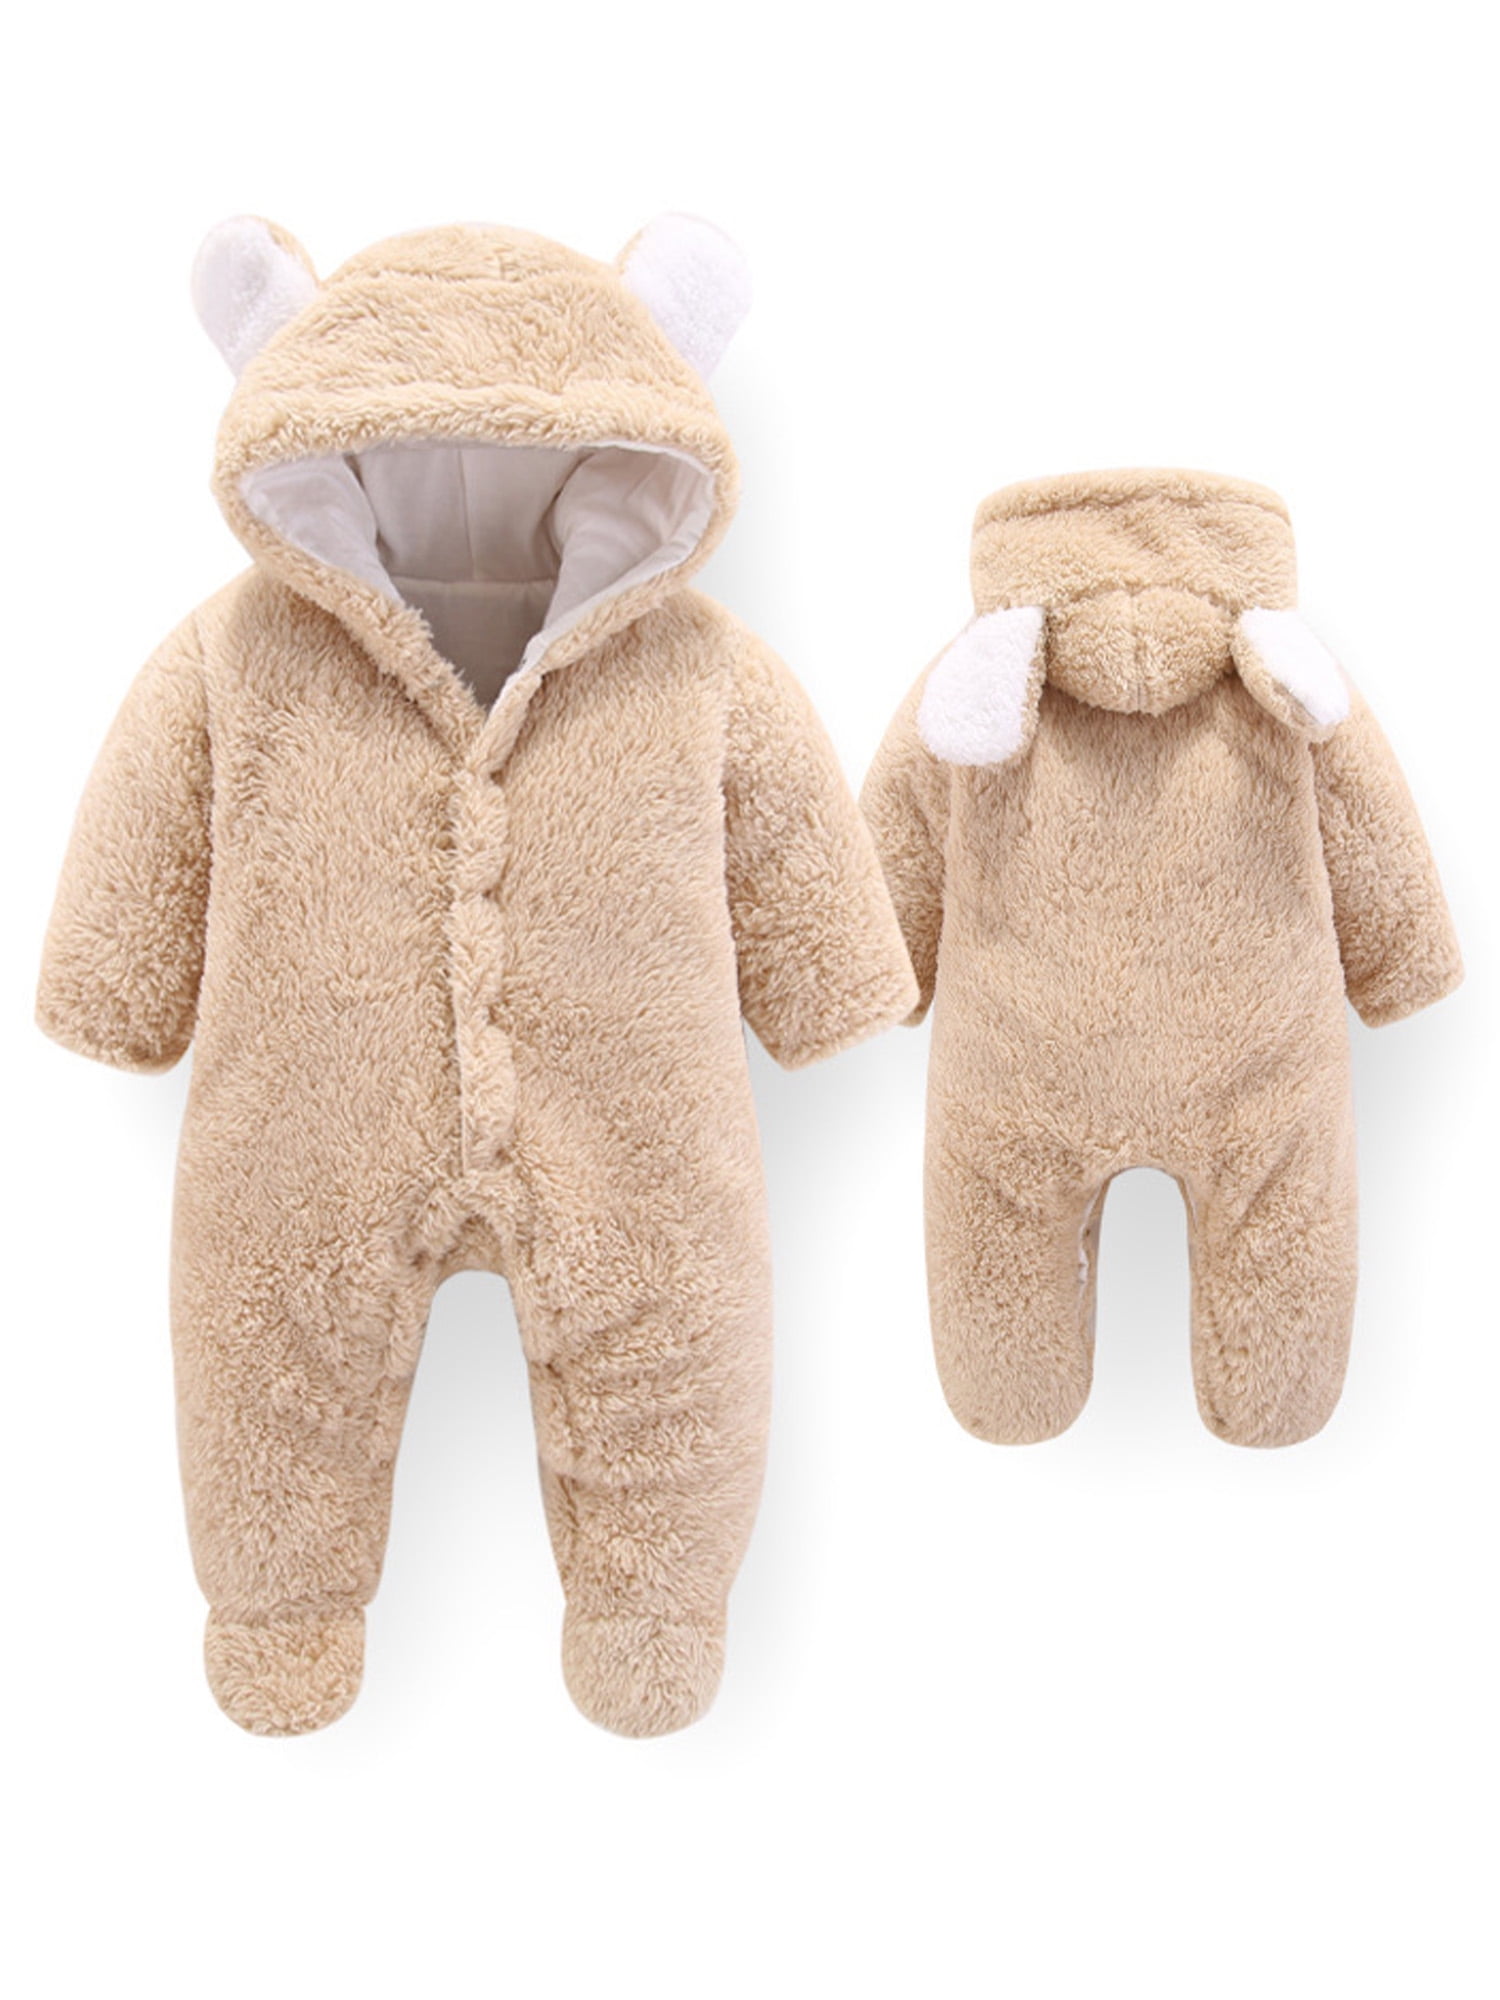 JiAmy Baby Down Snowsuit Hooded Romper Winter Outfits Cartoon Bear Jumpsuit for 3-18 Months 